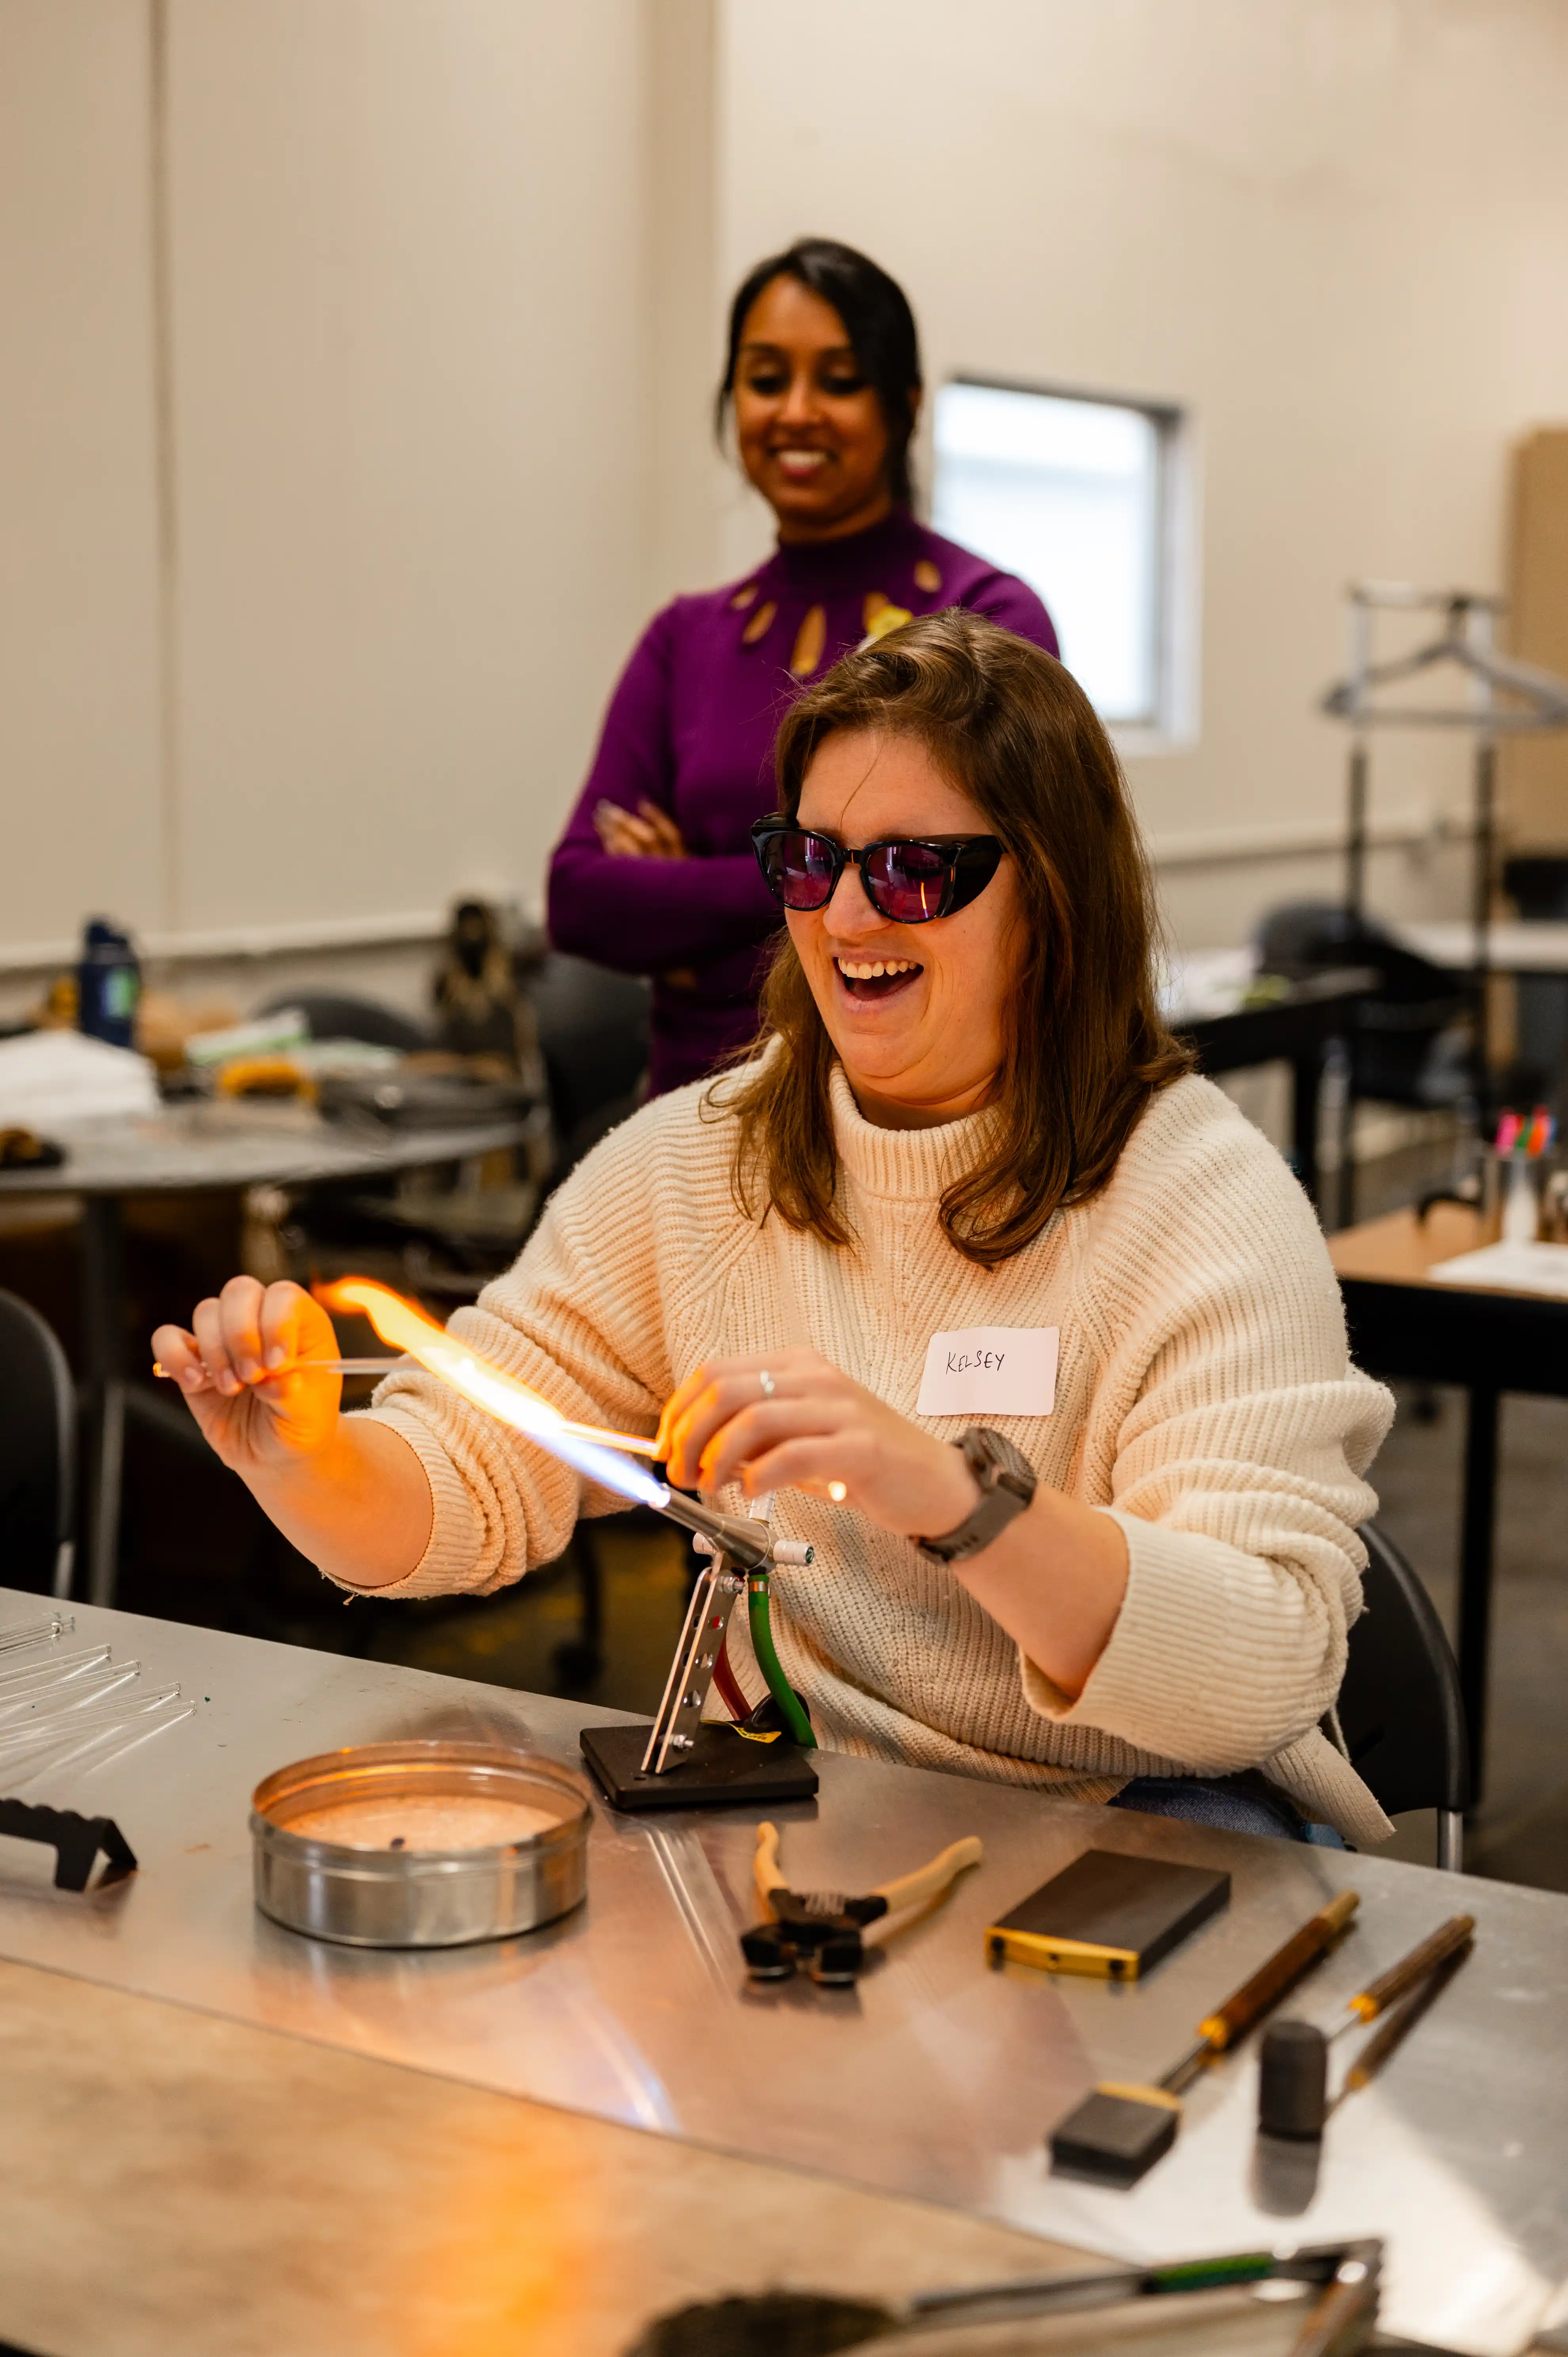 Woman in a cream sweater and sunglasses laughing while shaping a glass piece with a torch as another woman looks on in a workshop environment.